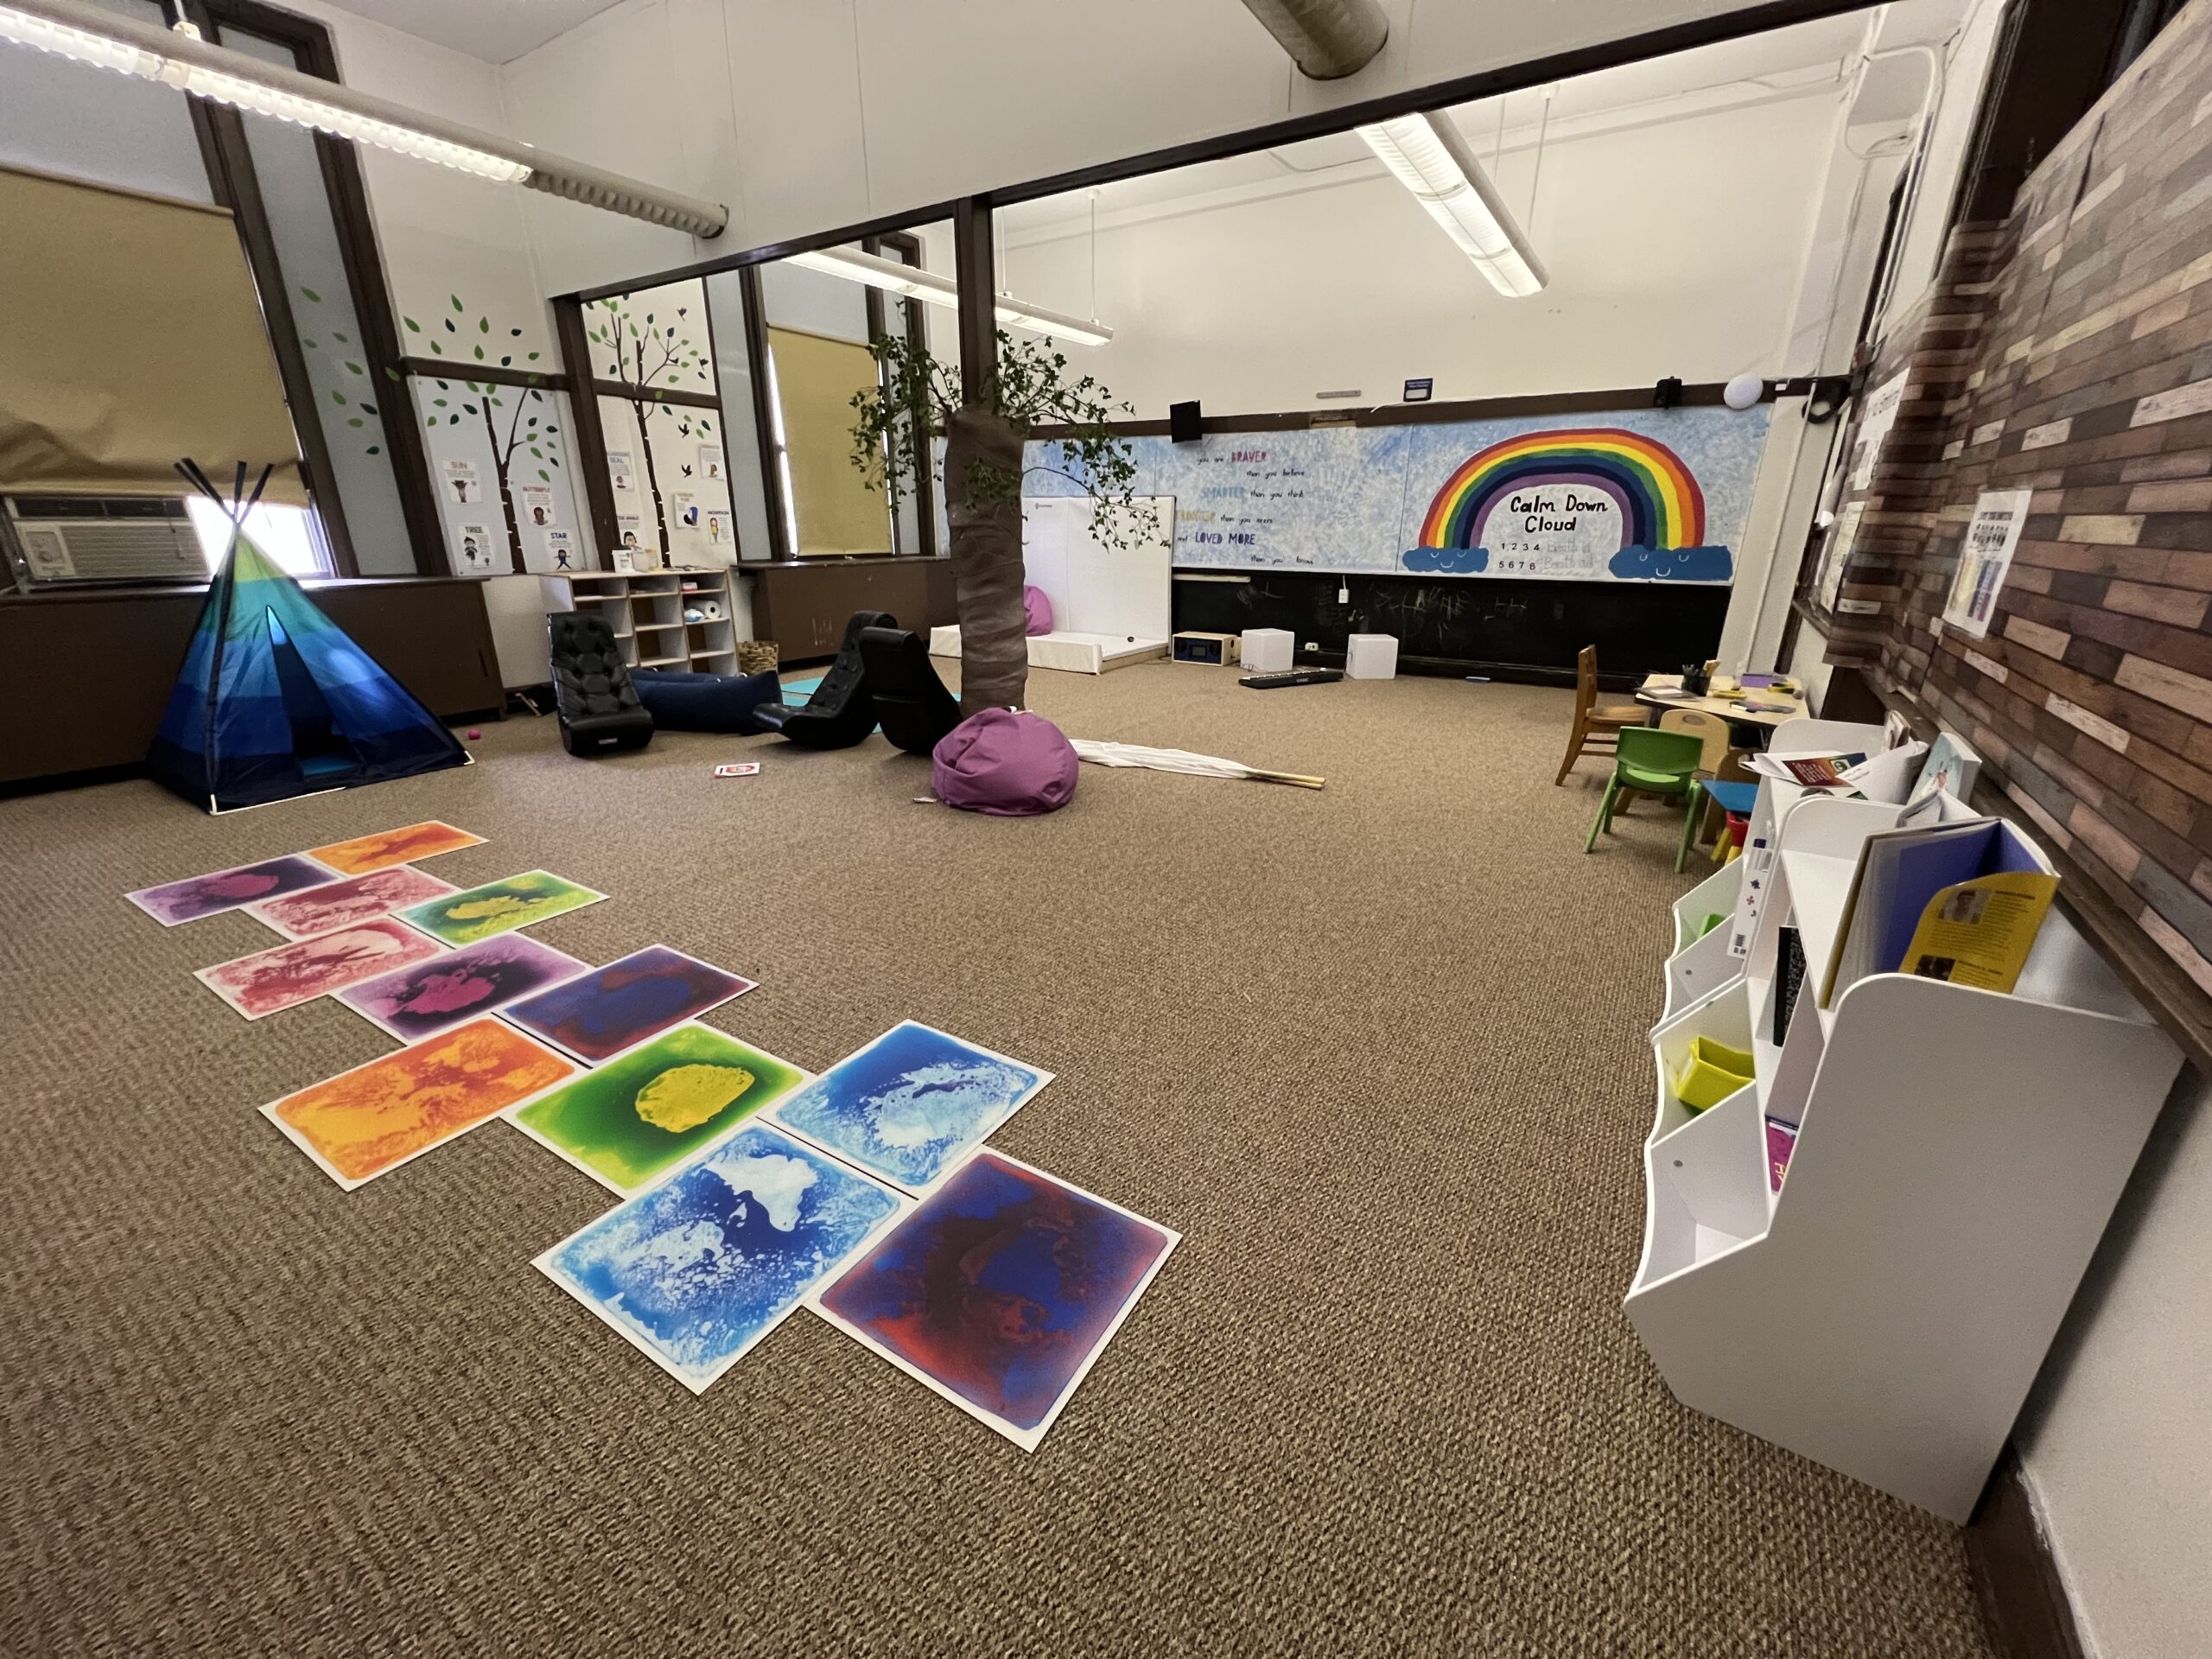 View of a classroom with carpeting. In the center there is a pole wrapped & decorated as a tree. There are gel pads, beanbags, rocking chairs, yoga mats and a tent. On the back wall is a bubble mirror. On the side wall there are cubbies and a small table & chairs.